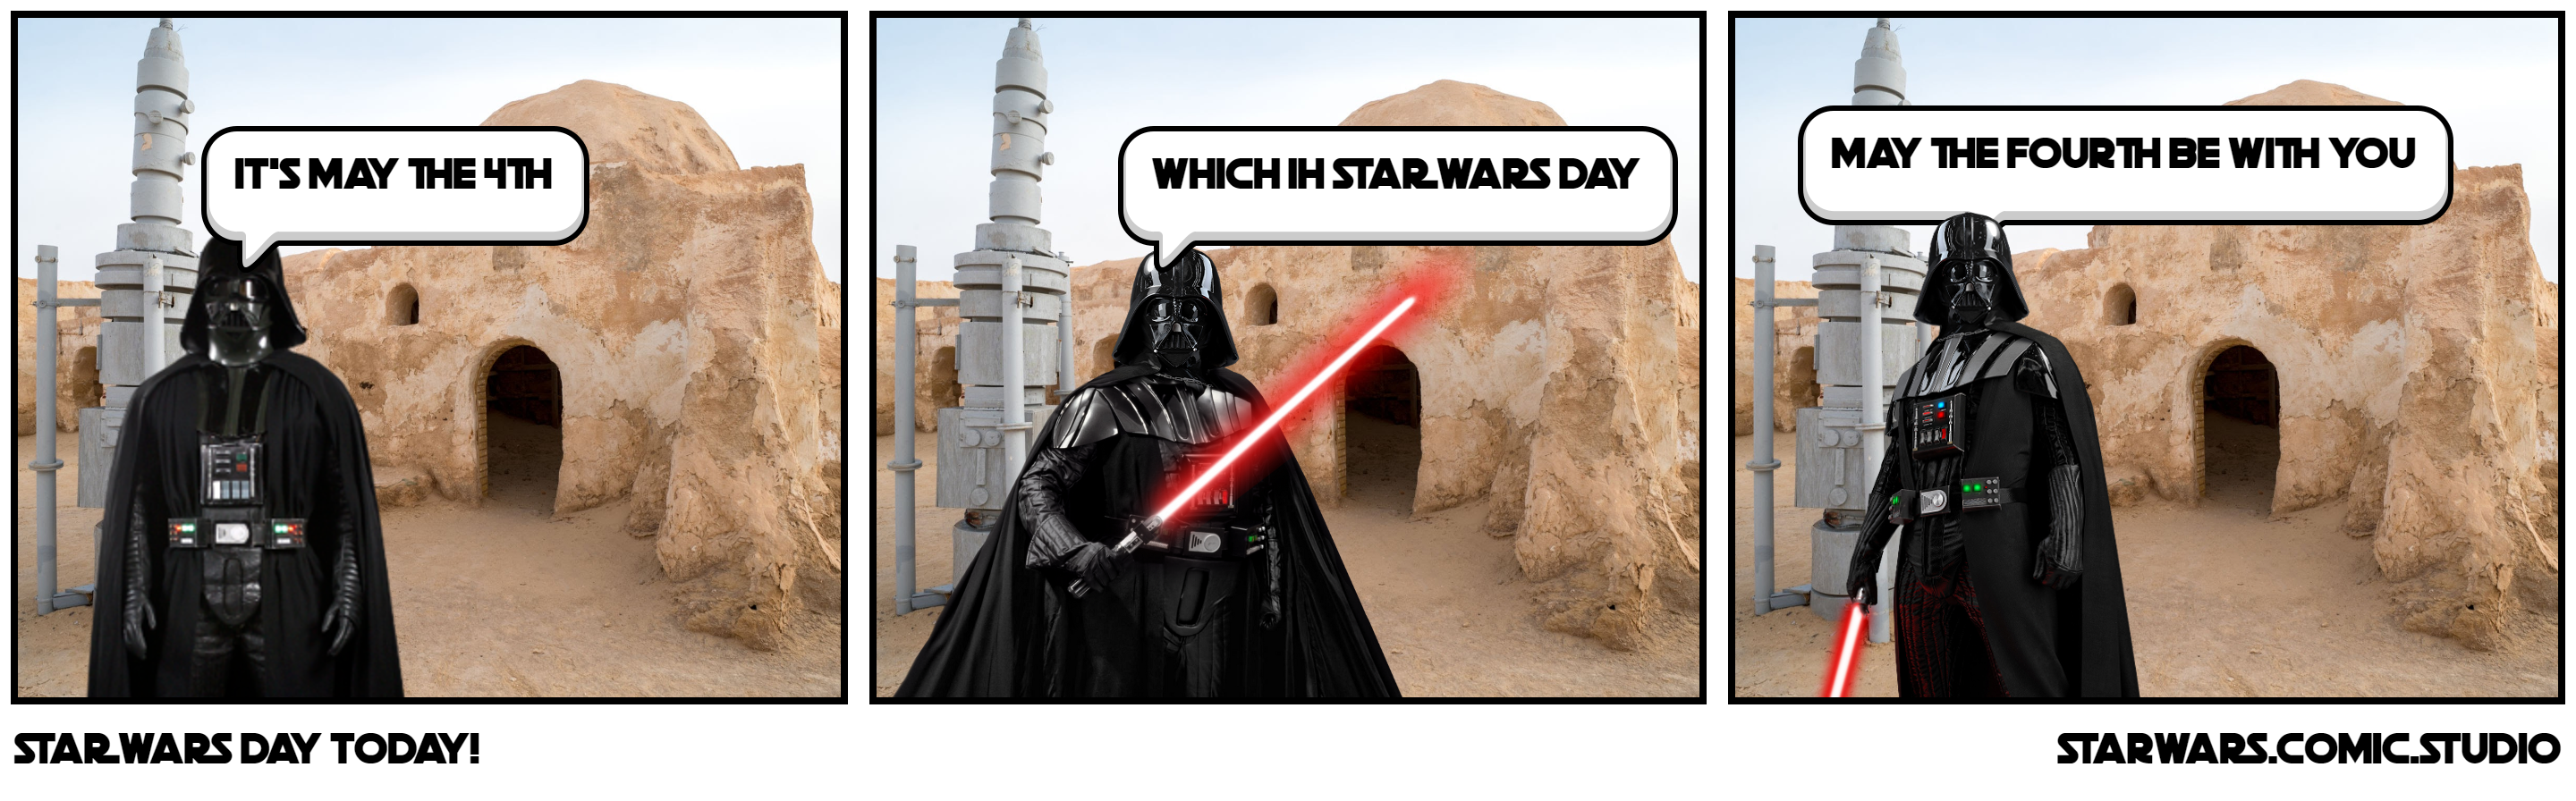 staR waRS day today!